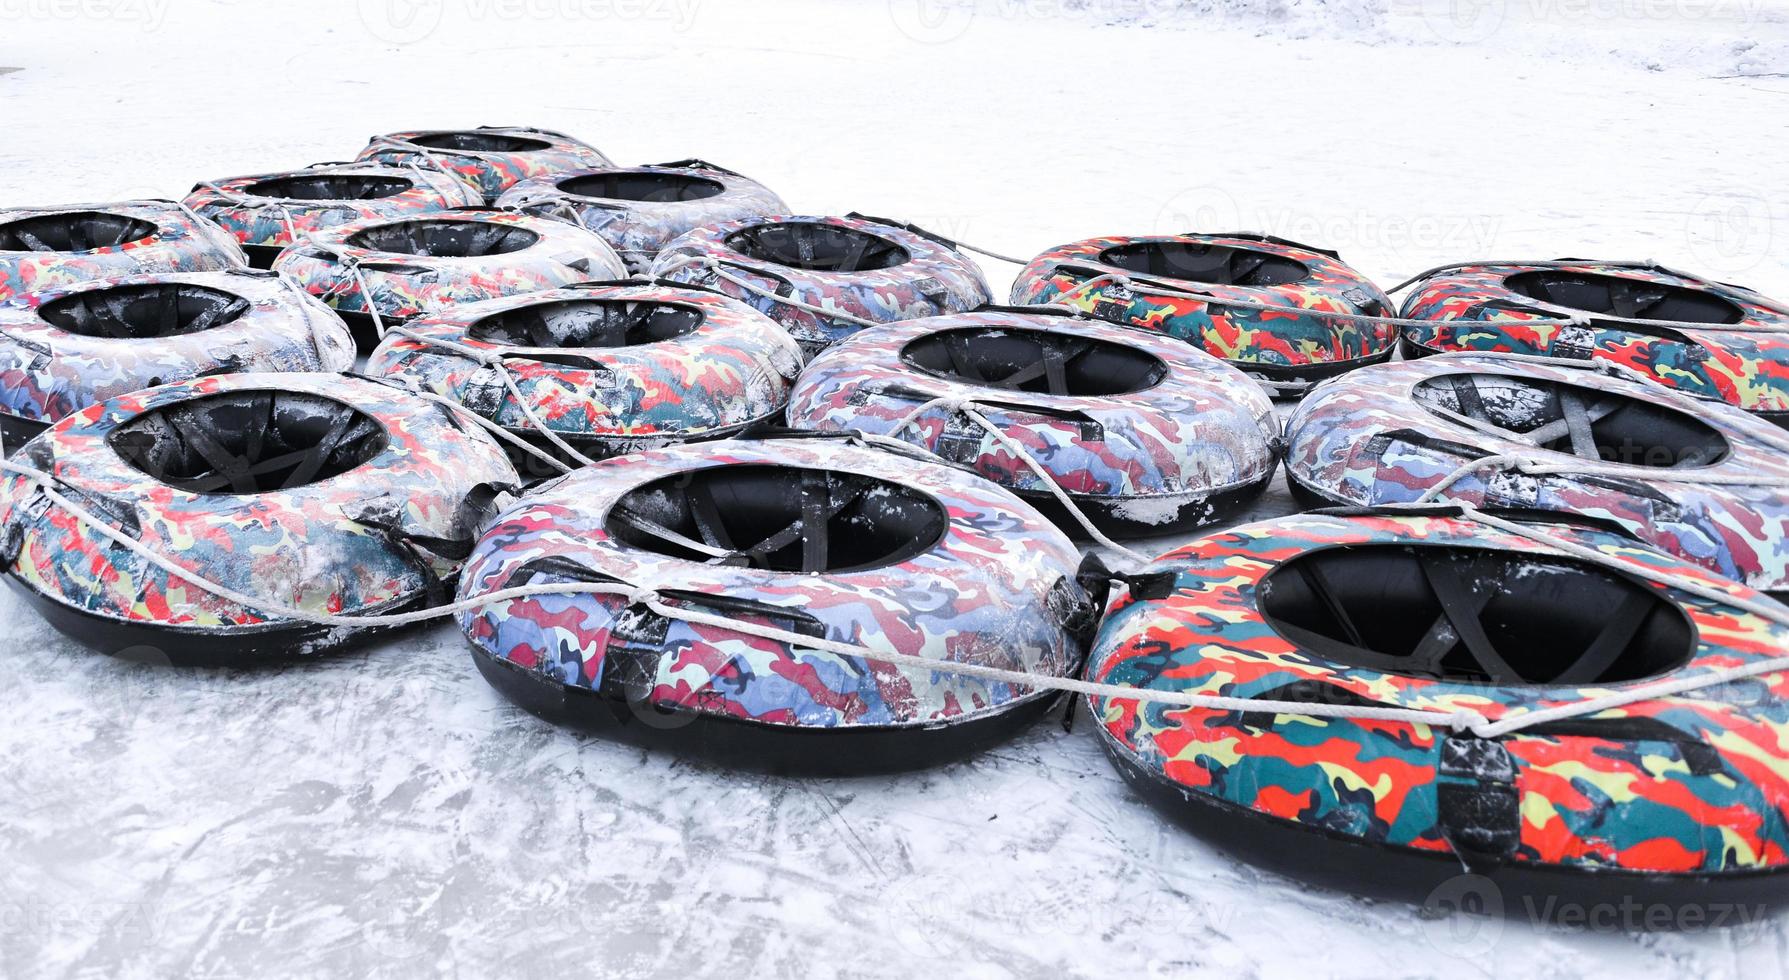 Inflatable sledges on ice in winter photo